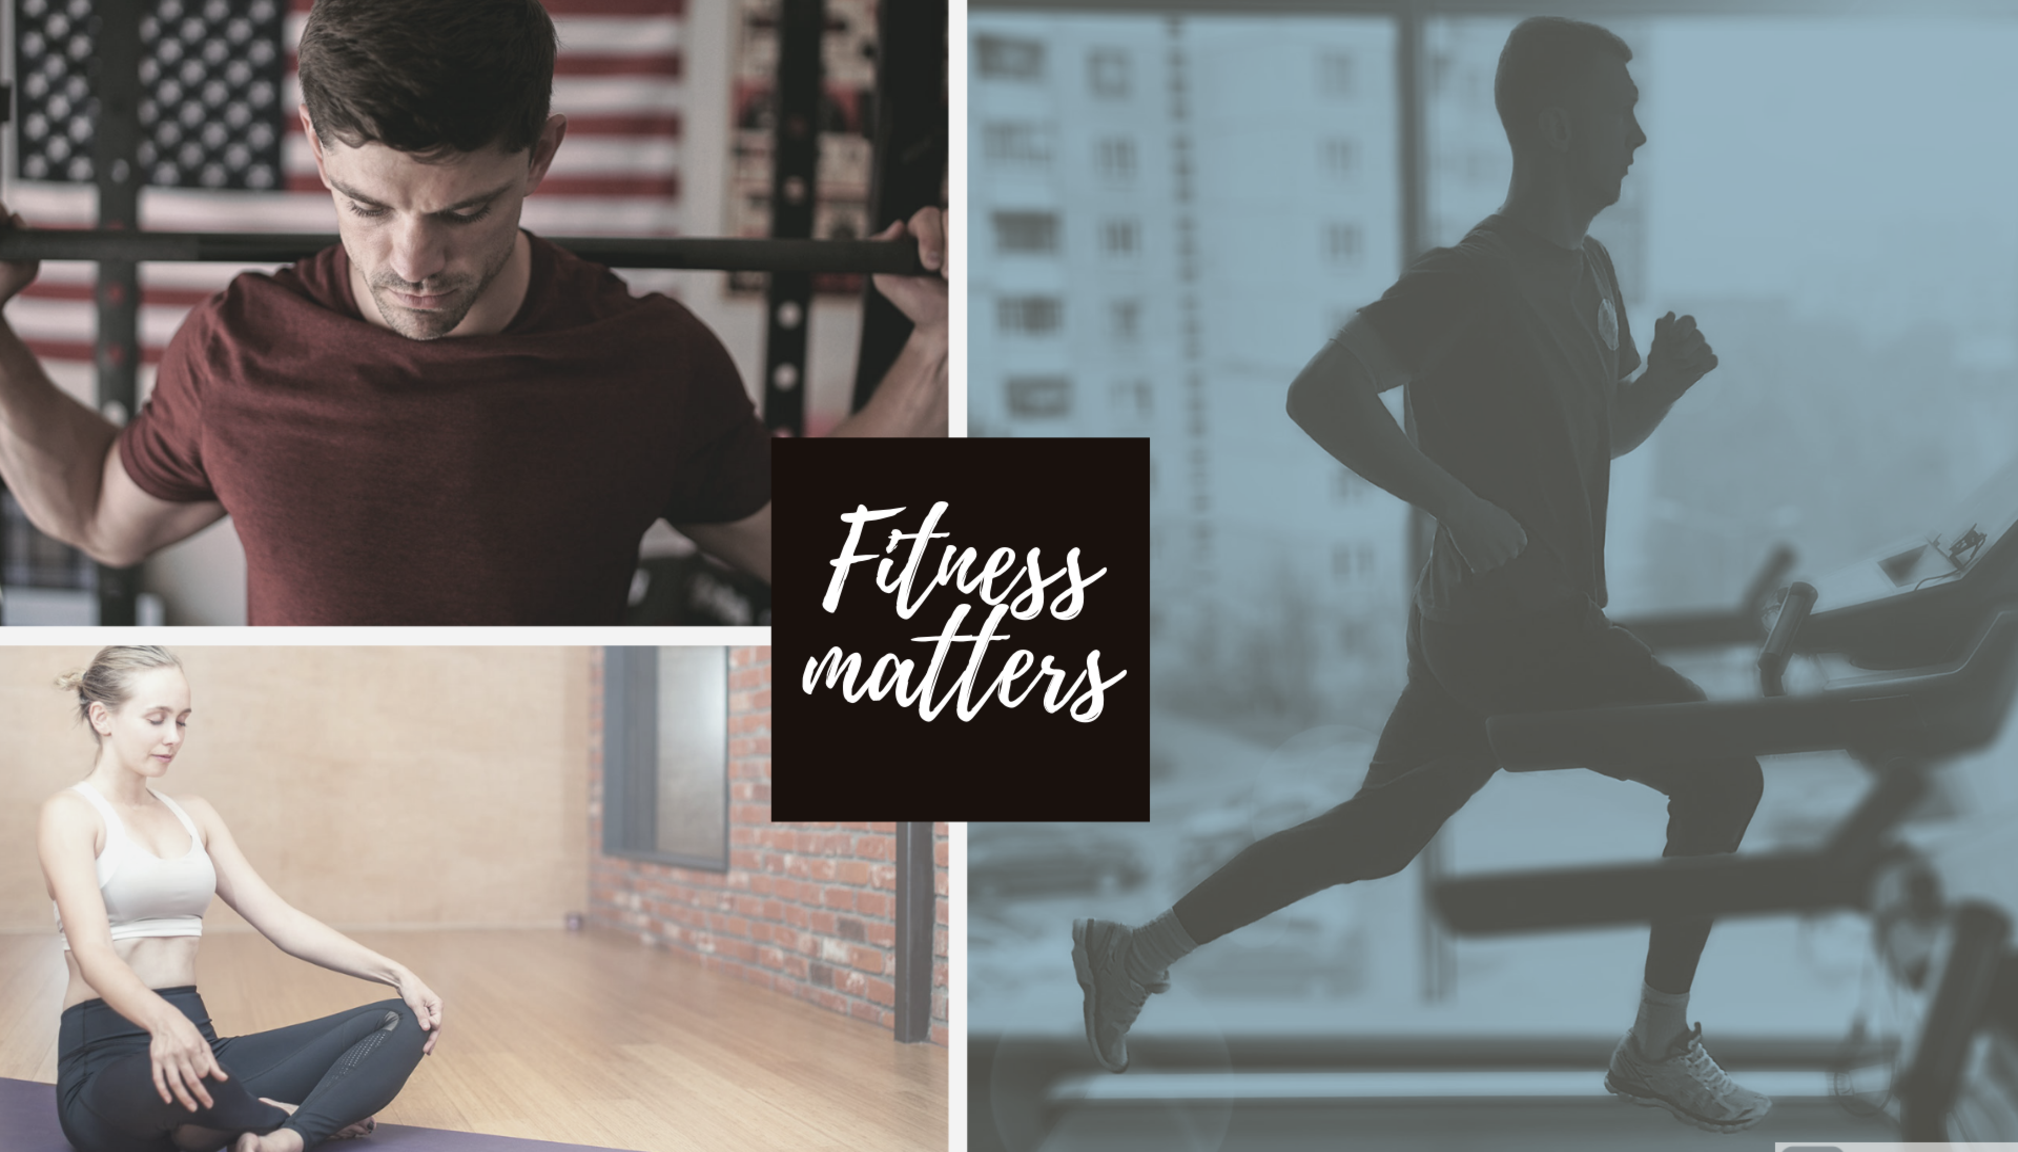 Because fitness matters.